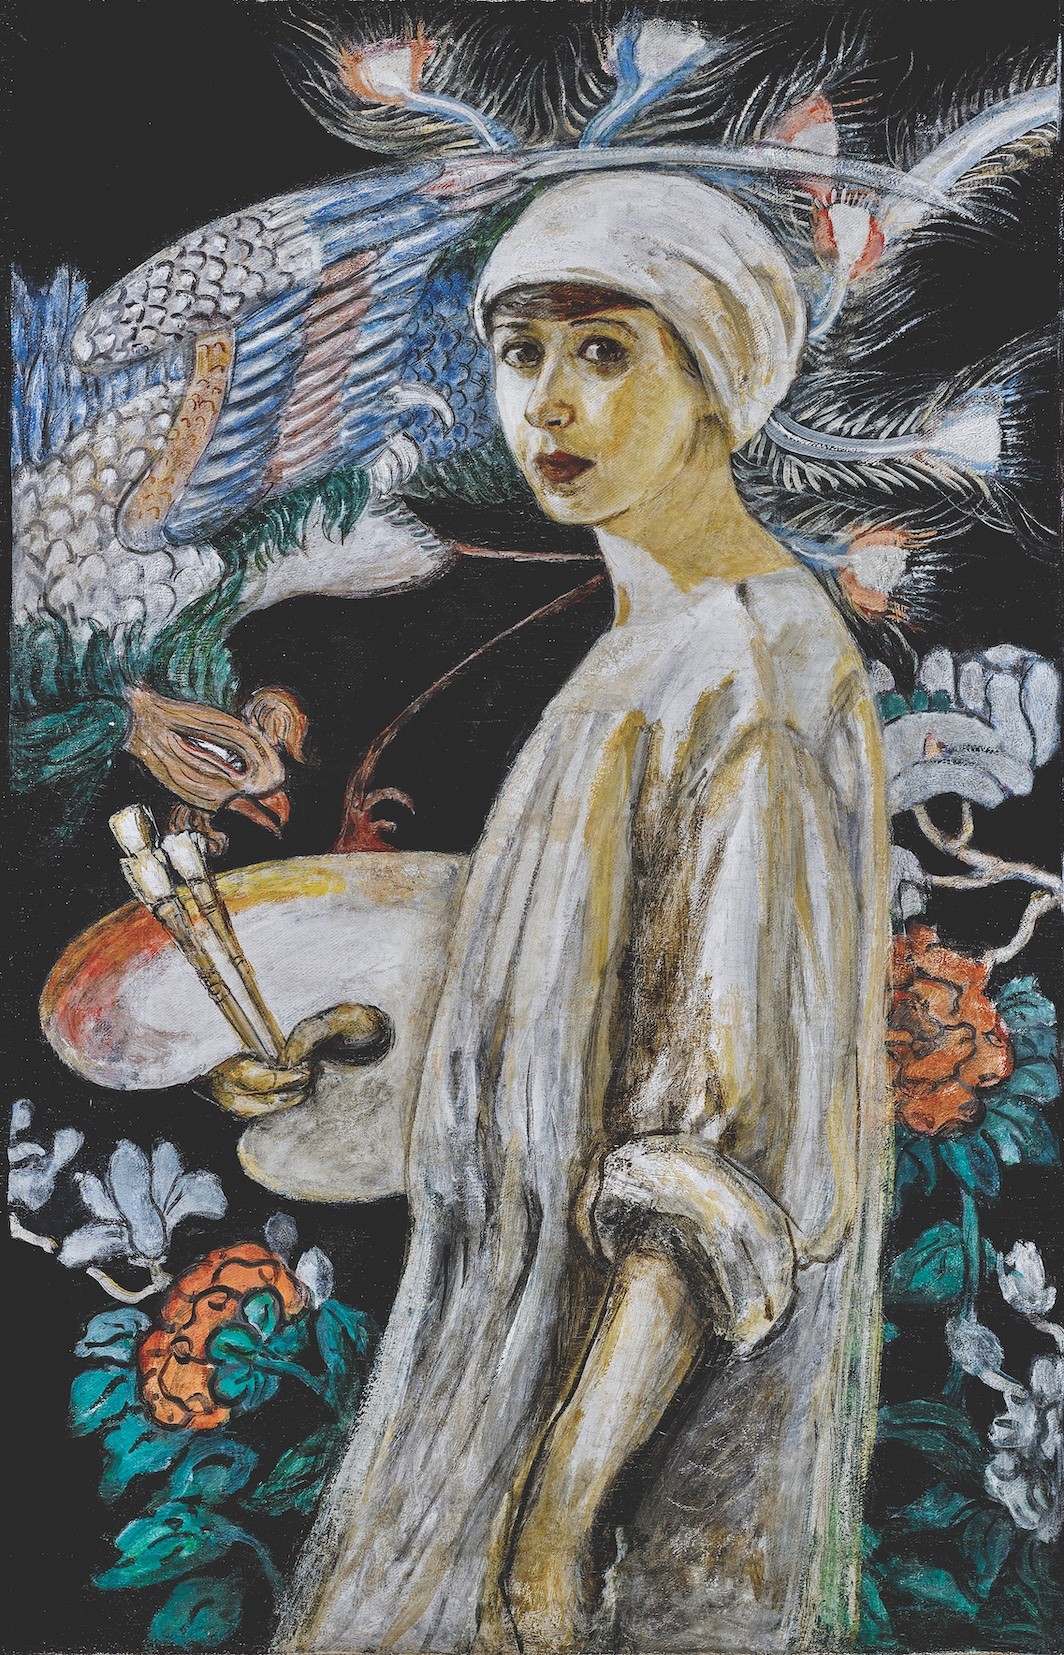 Florine Stettheimer, Self-Portrait with Chinese Screen, ca. 1914–16, oil on canvas, 39 1/2 x 31 3/4". Art Properties, Avery Architectural & Fine Arts Library, Columbia University in the City of New York, Gift of the Estate of Ettie Stettheimer